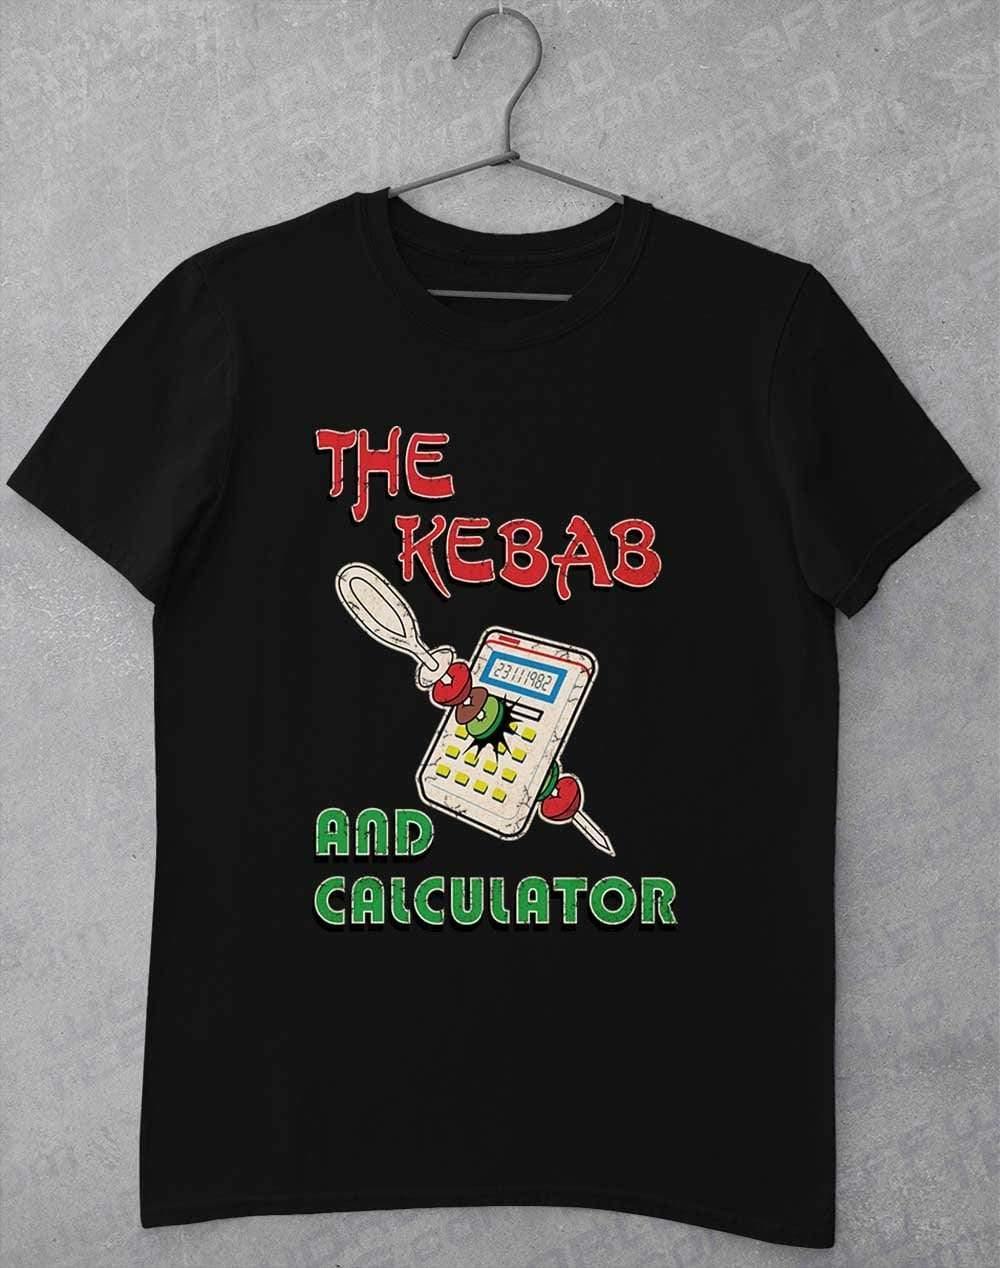 The Kebab and Calculator 1982 T-Shirt S / Black  - Off World Tees